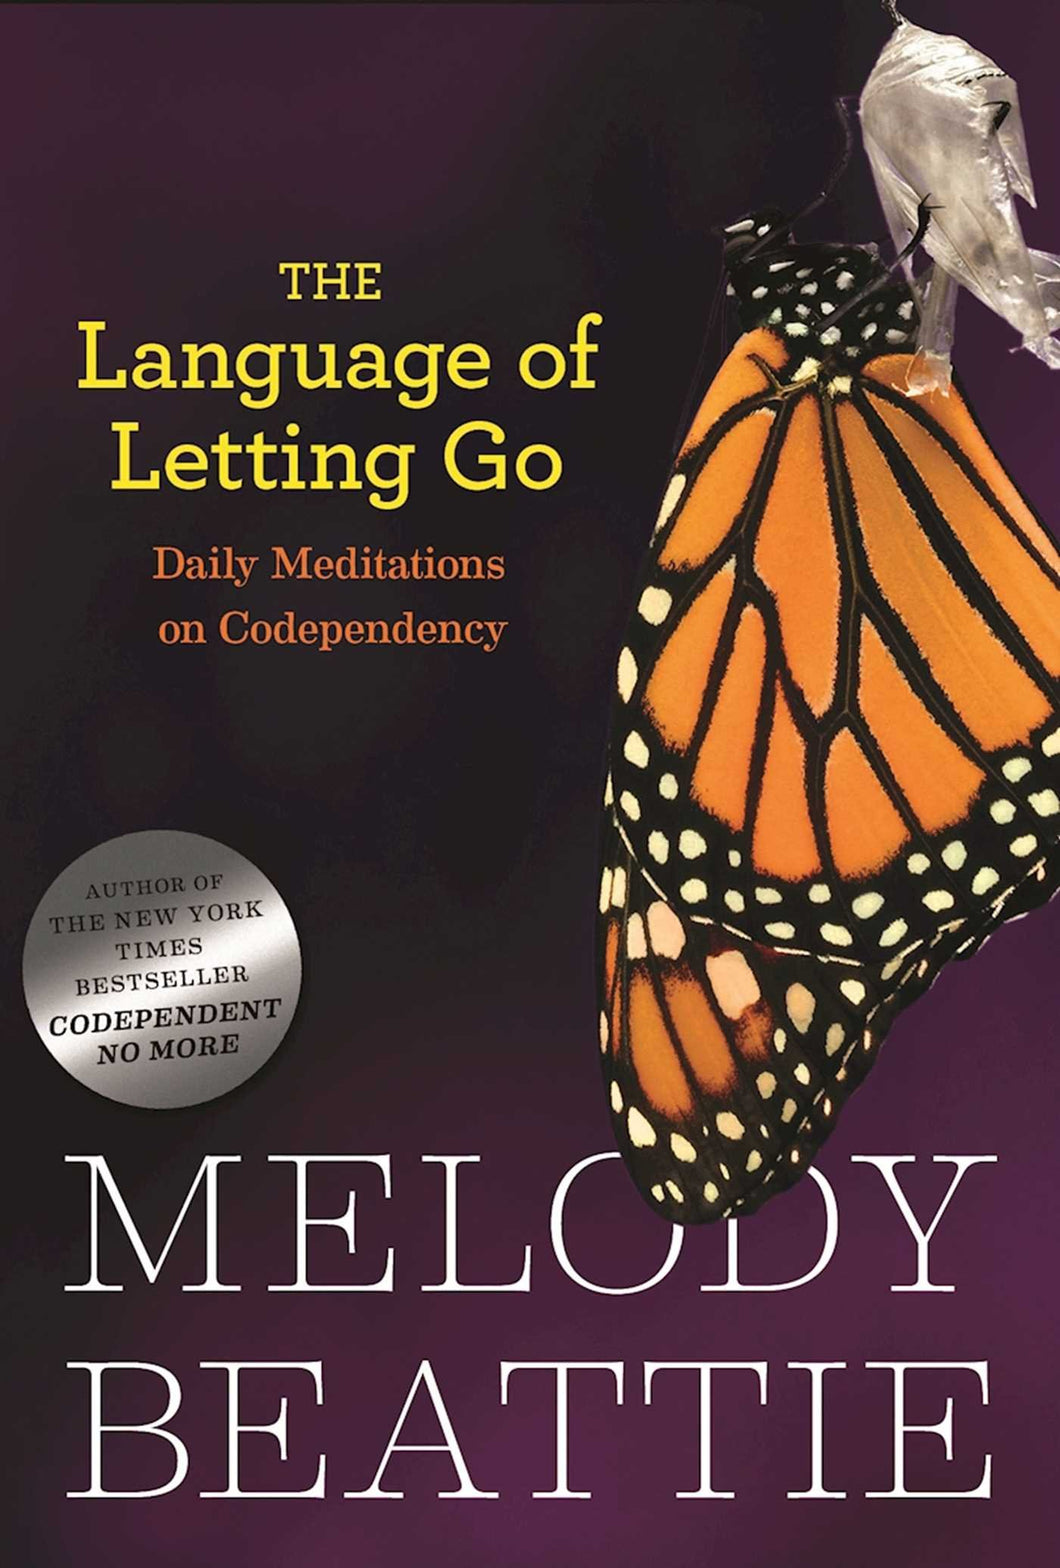 The Language Of Letting Go: Daily Meditations On Codependency [Melody Beattie]